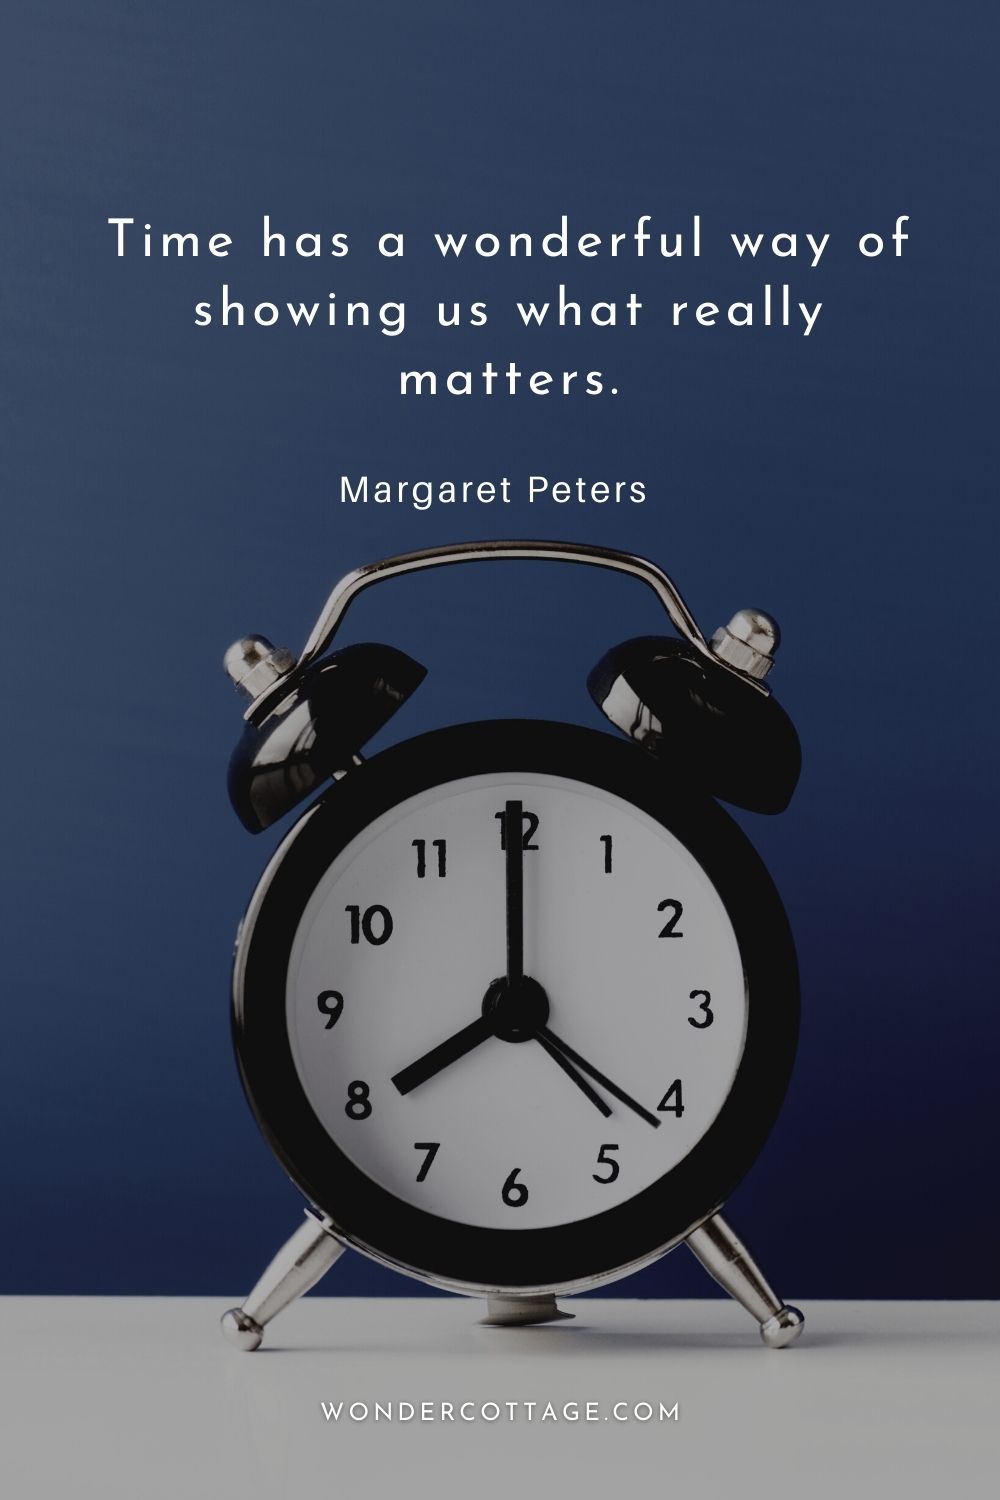 Time has a wonderful way of showing us what really matters. Margaret Peters
Time Quotes